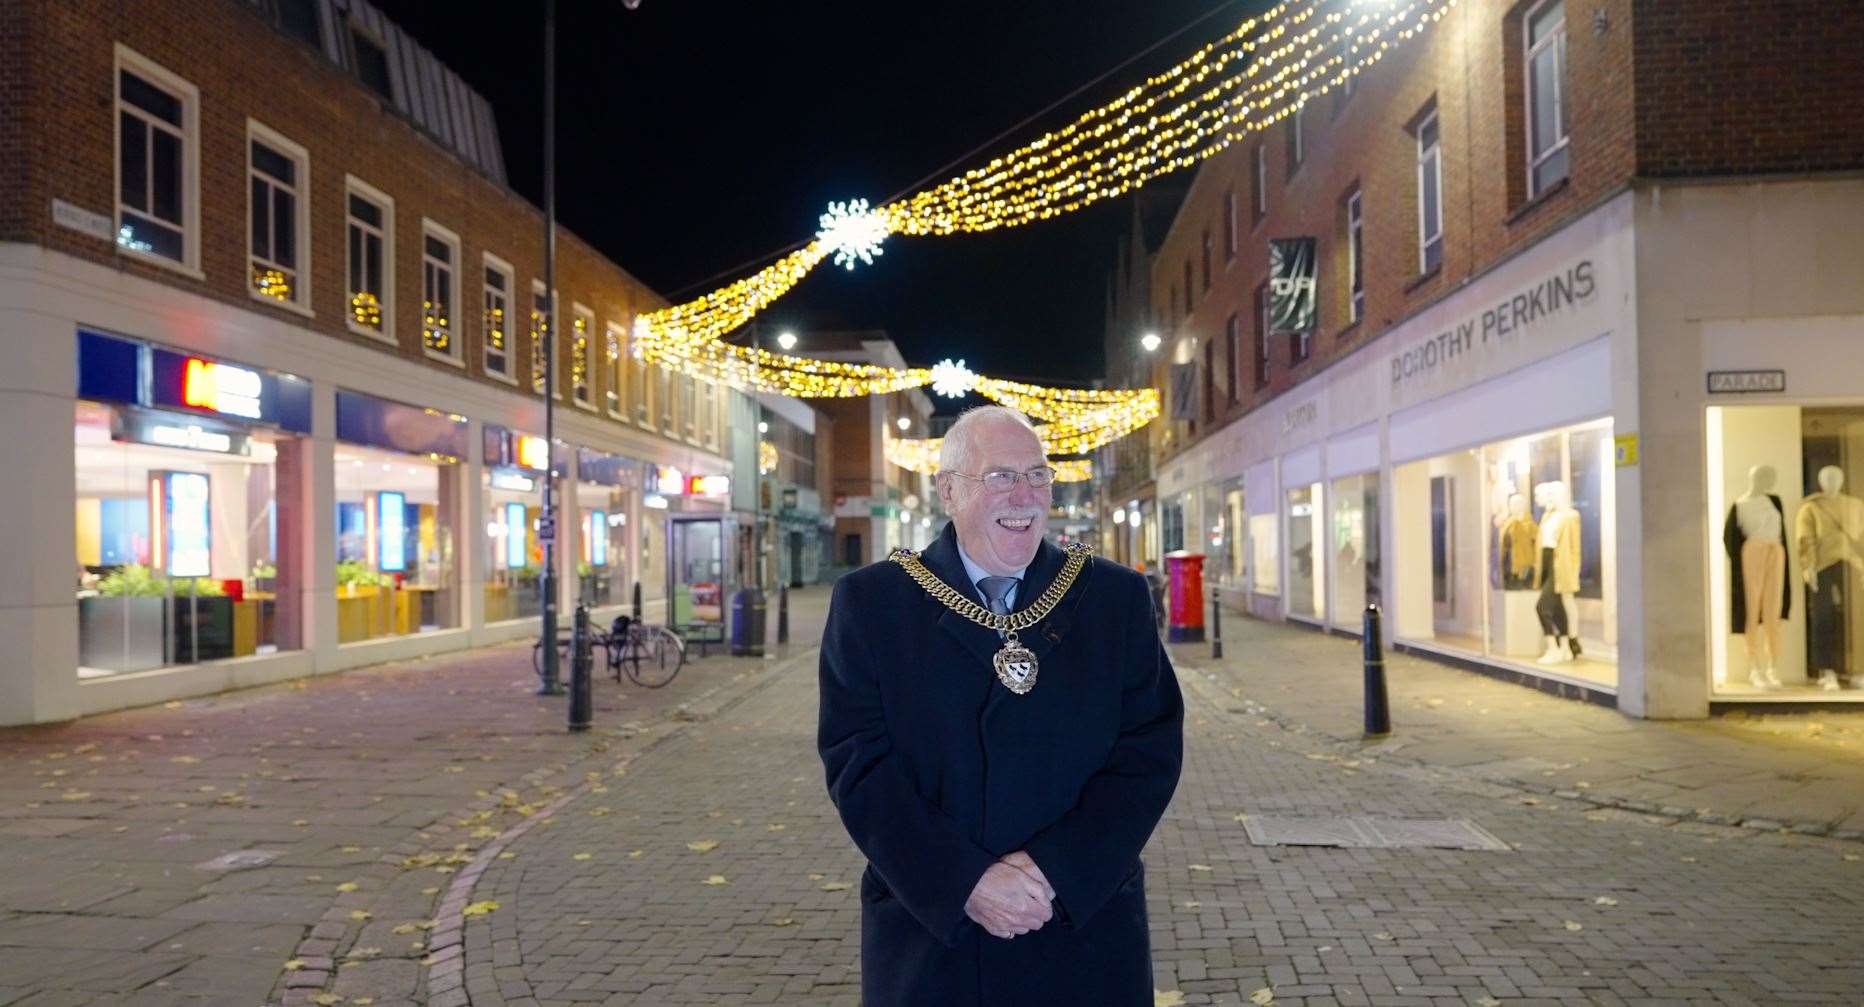 Lord Mayor of Canterbury Cllr Pat Todd has magical Christmas powers this year